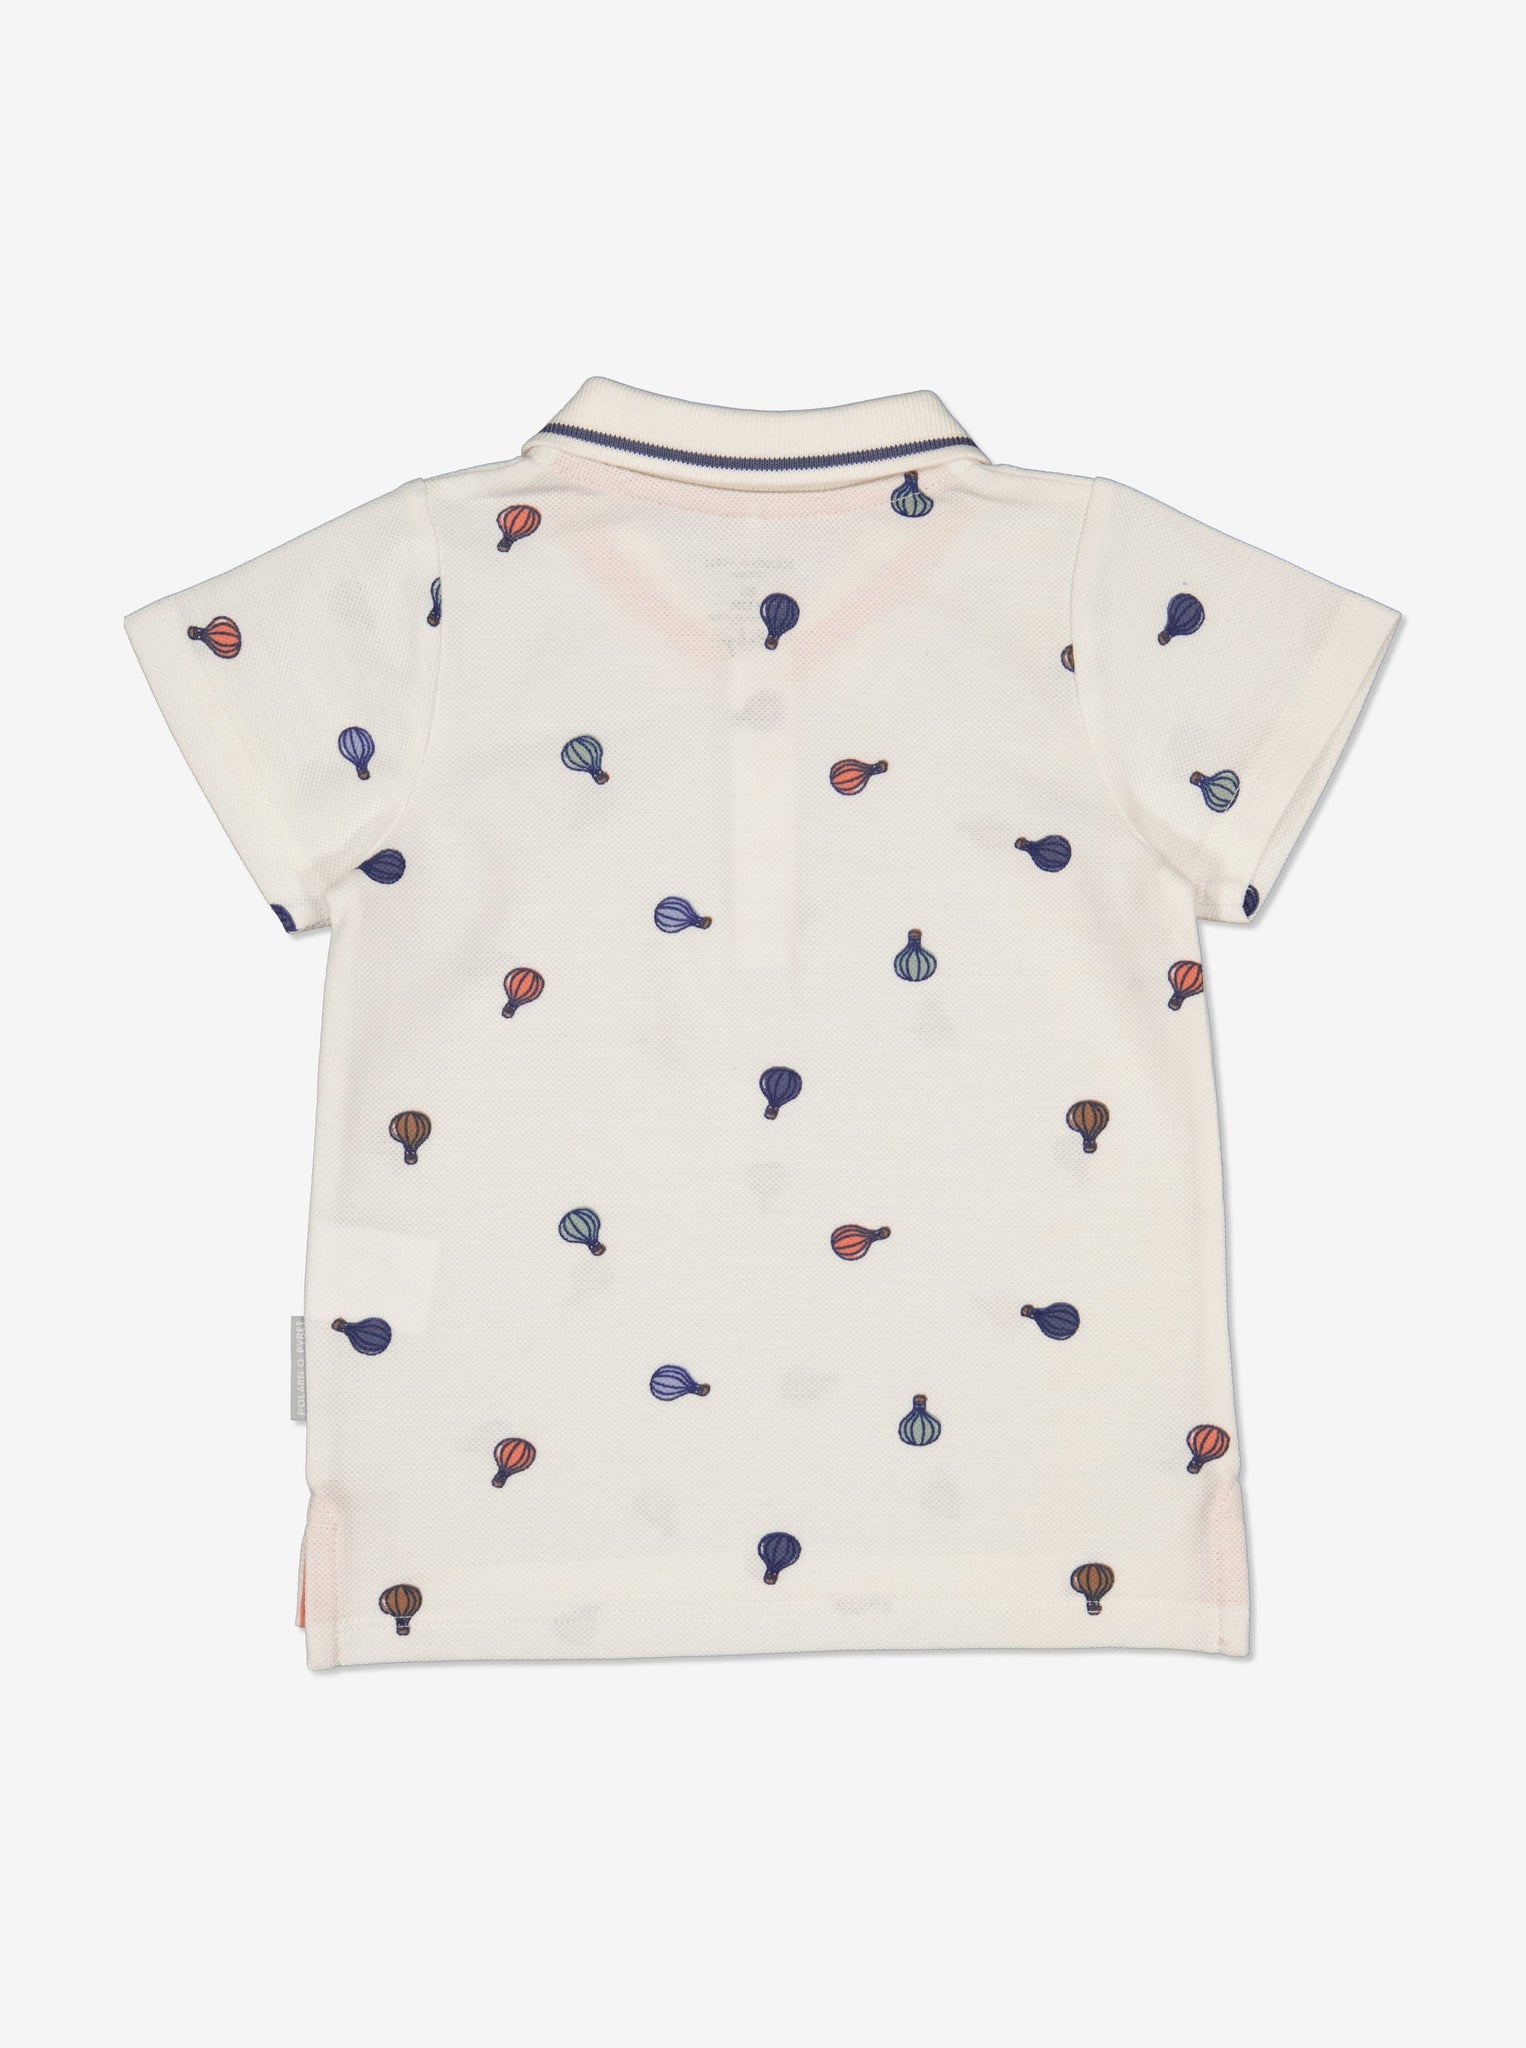 Balloon Print White Baby Polo Shirt from Polarn O. Pyret Kidswear. Made from 100% GOTS Organic Cotton.